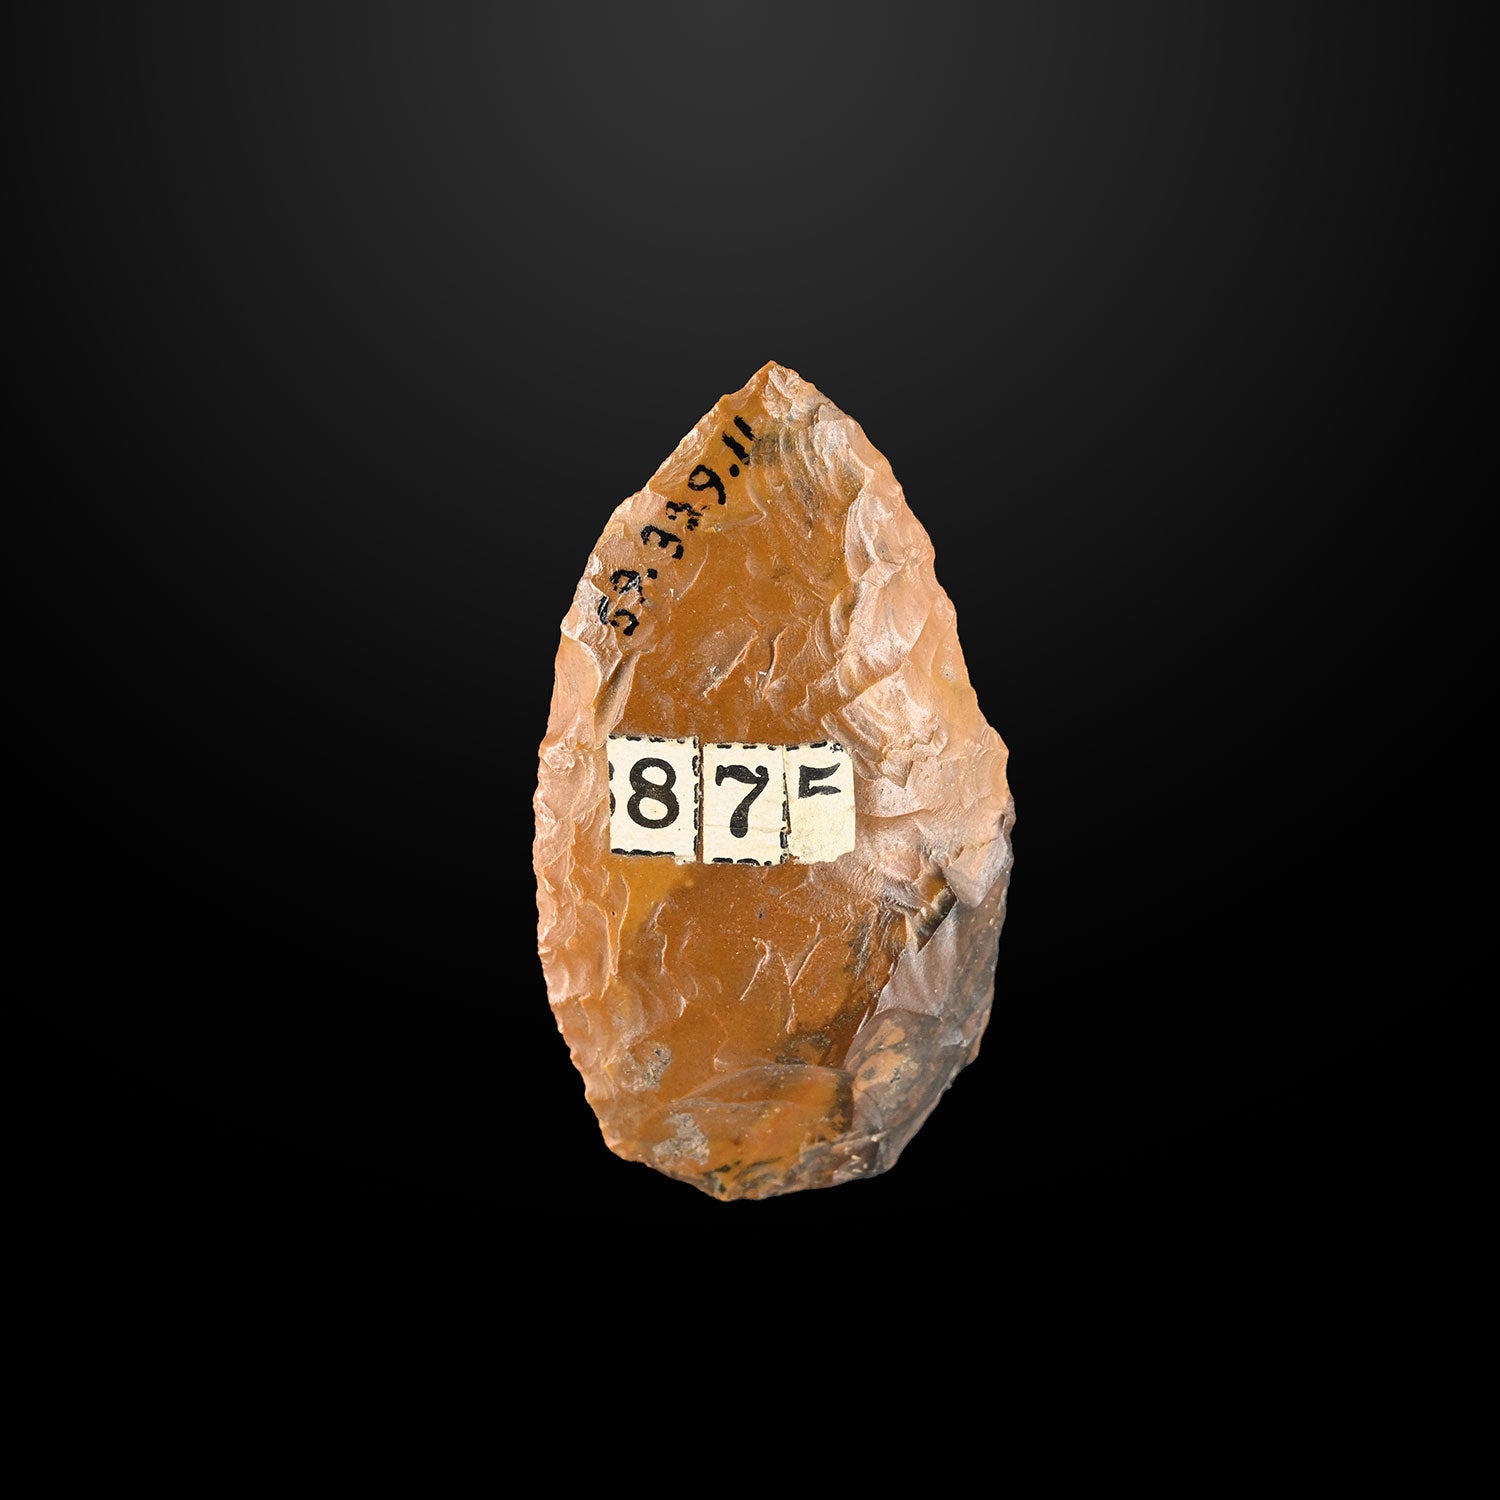 A Published Egyptian Flint Spearhead from the Thebaid, <br><em>Neolithic - Pre Dynastic Period, ca. 7500 - 3700 BCE</em>